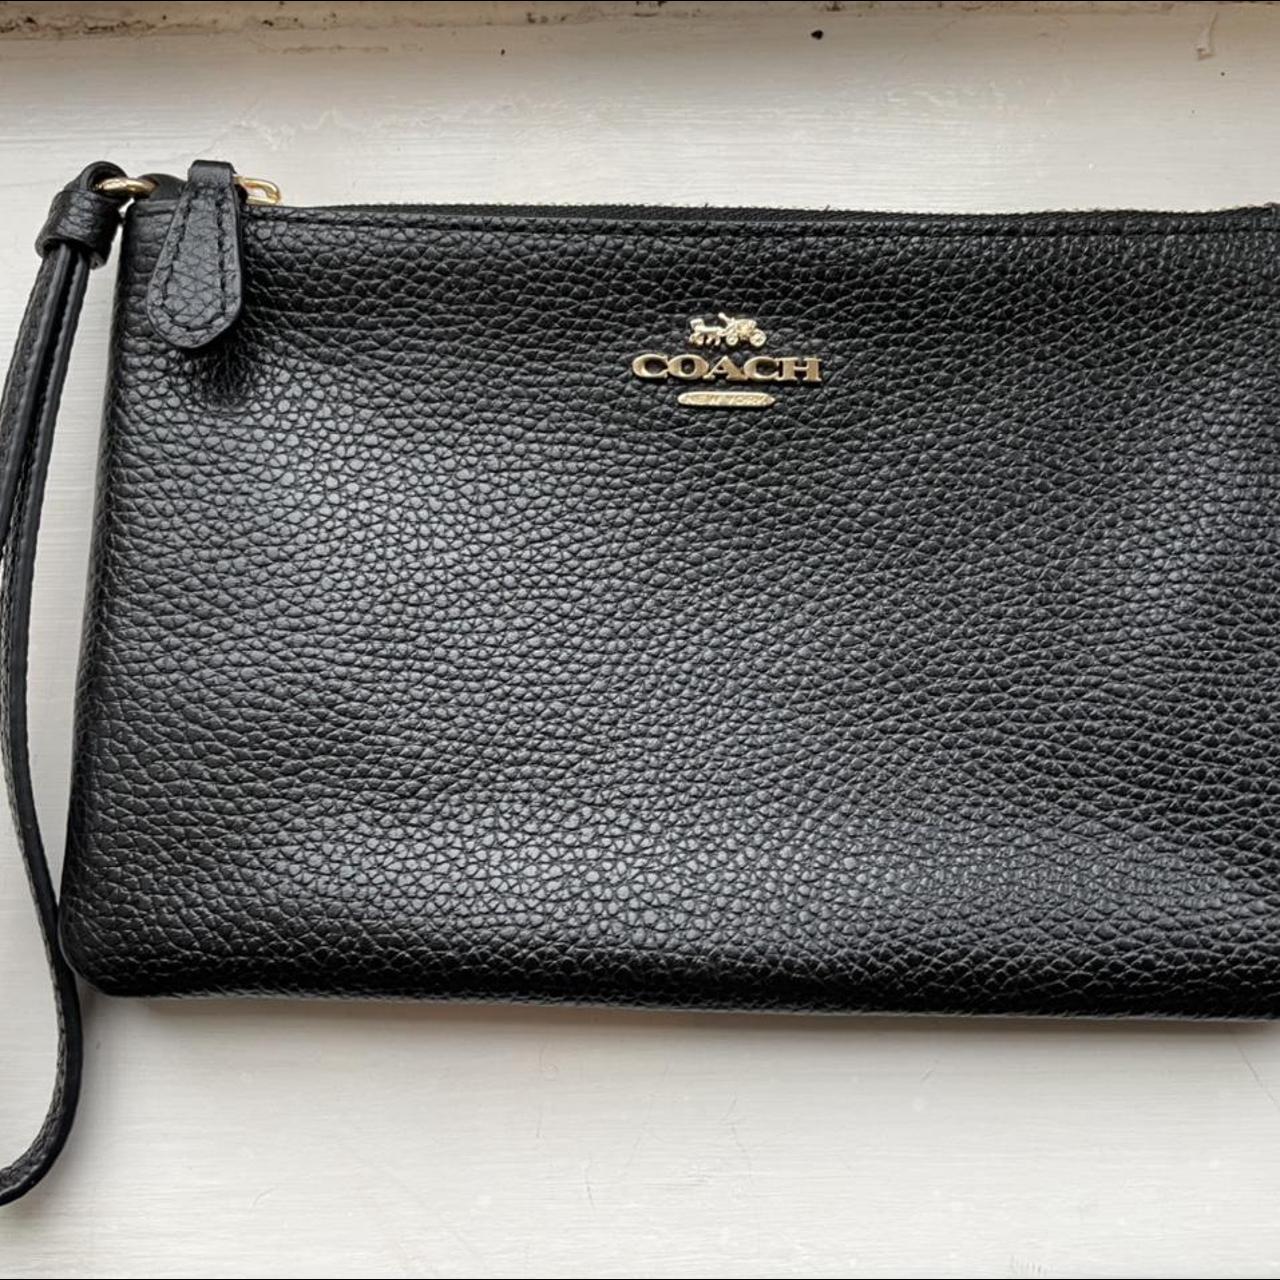 Product Image 3 - Two Coach accessories in black